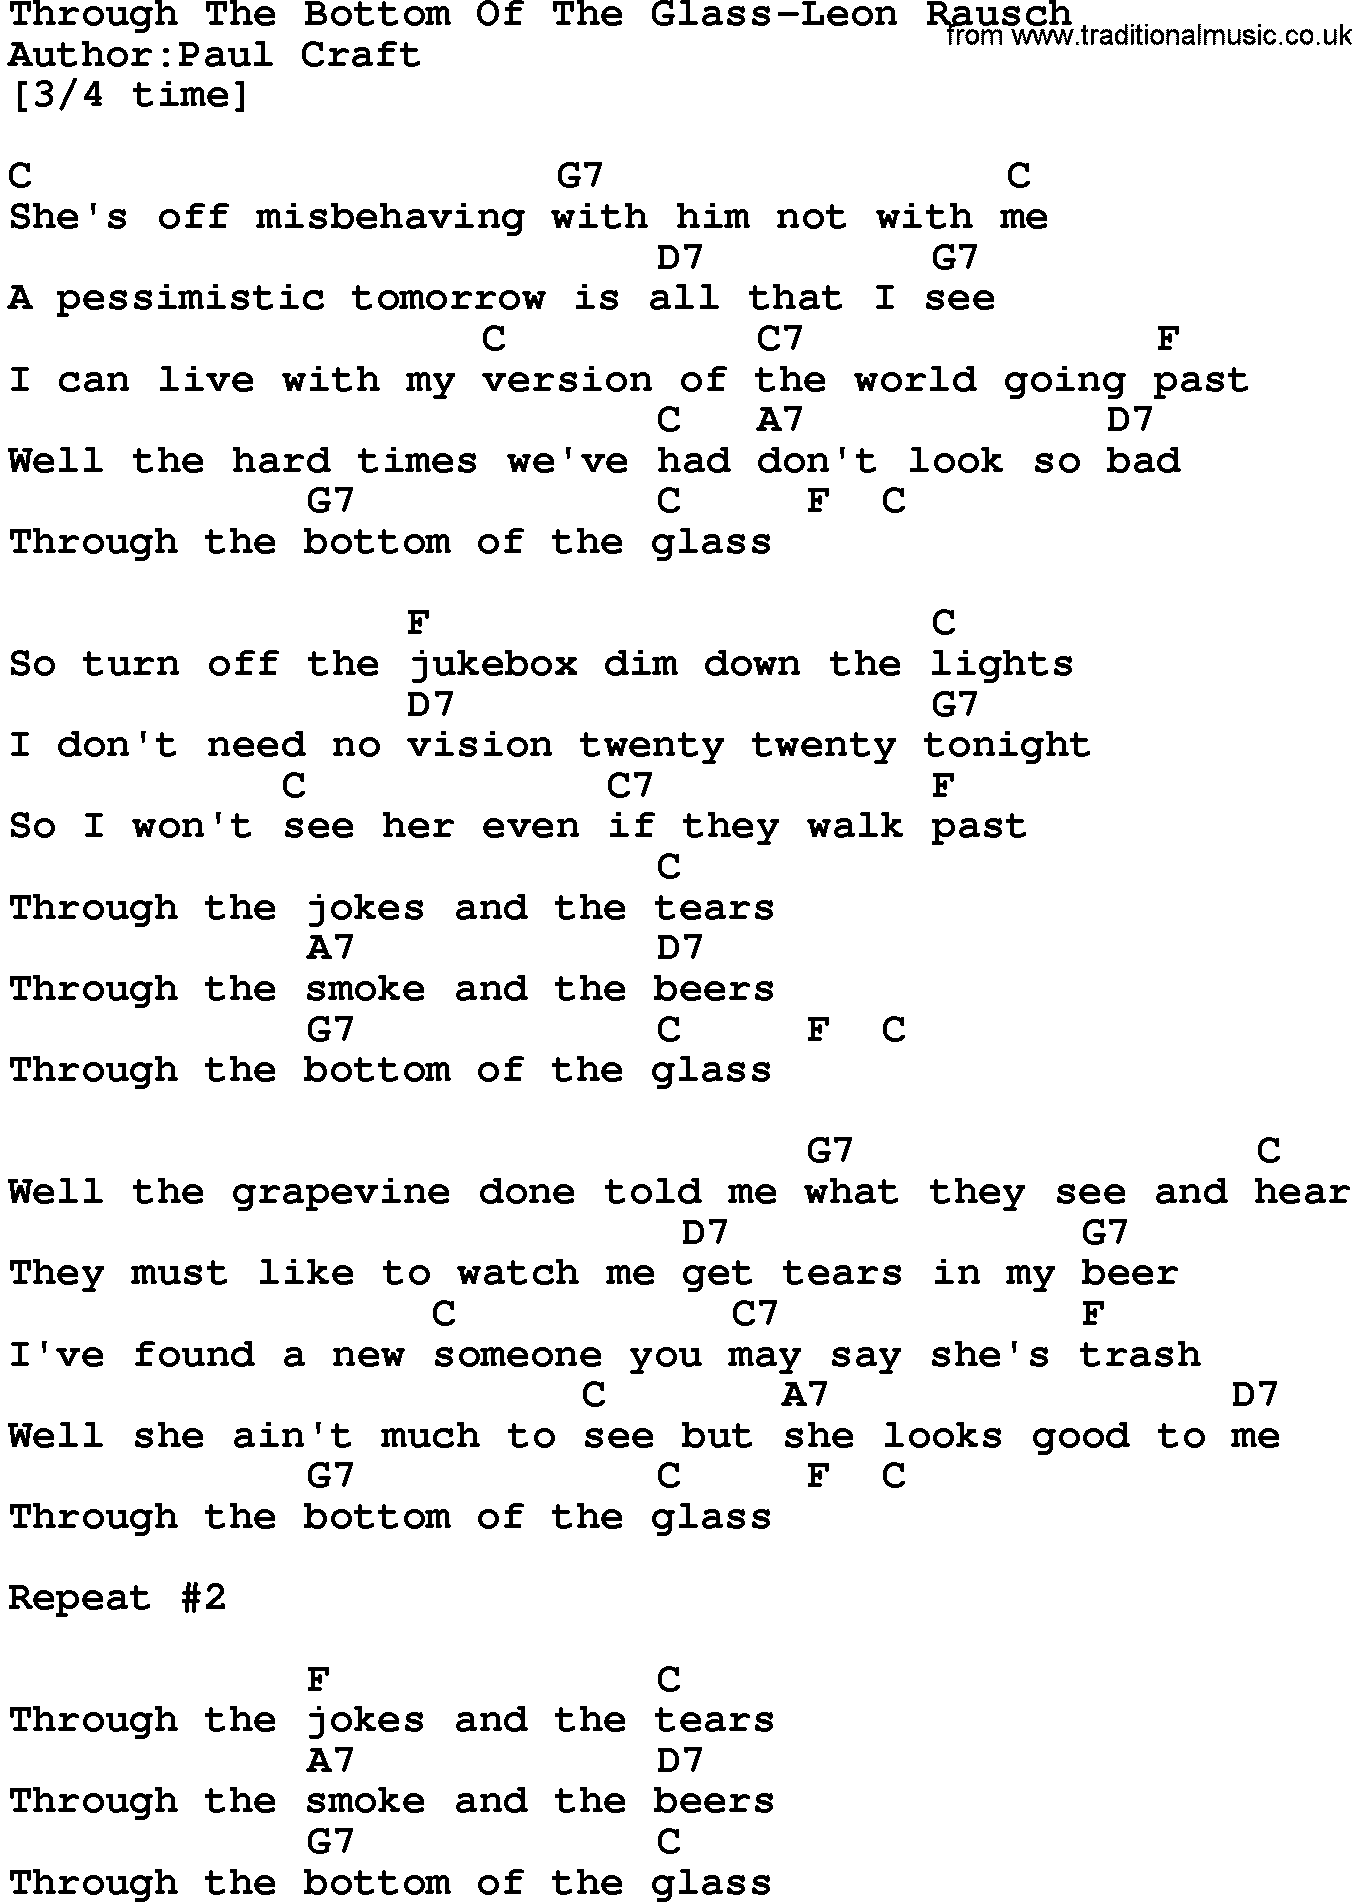 Country music song: Through The Bottom Of The Glass-Leon Rausch lyrics and chords